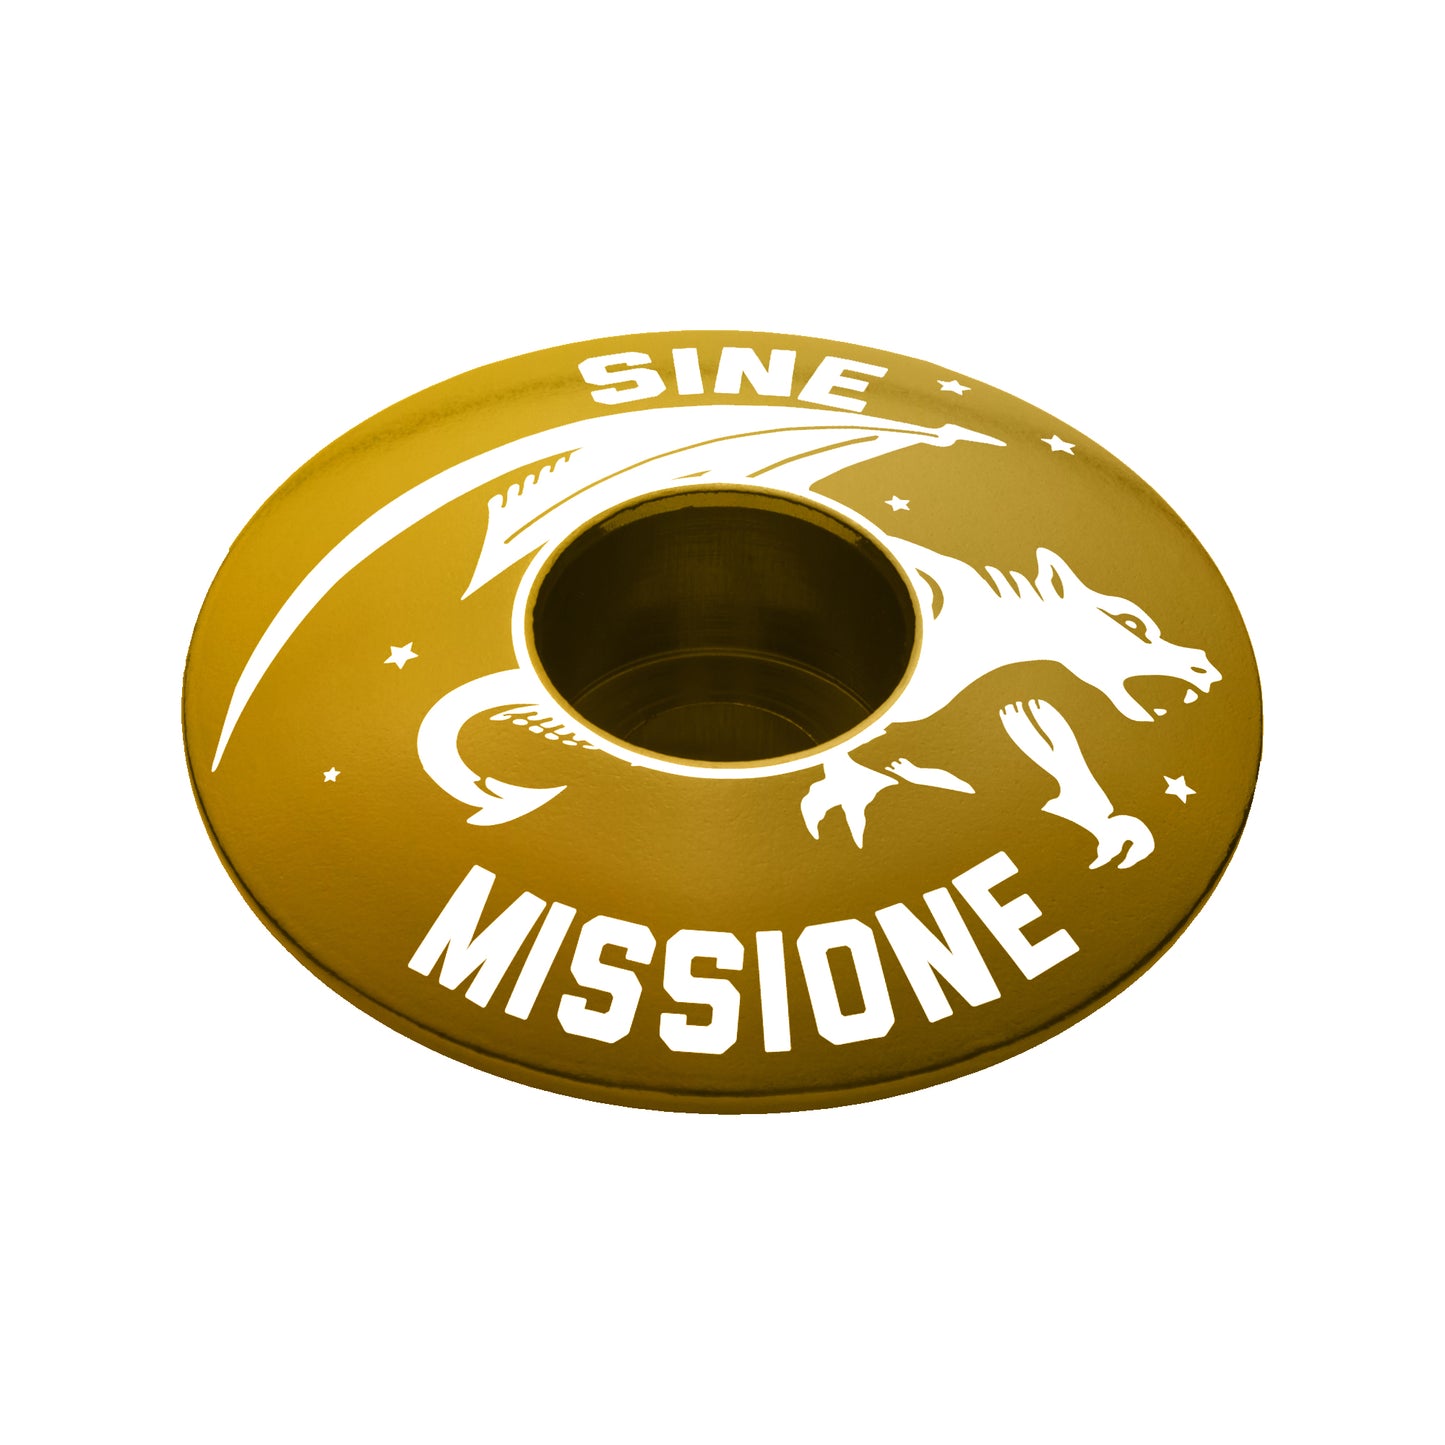 SINE MISSIONE - NO MERCY BICYCLE HEADSET CAP